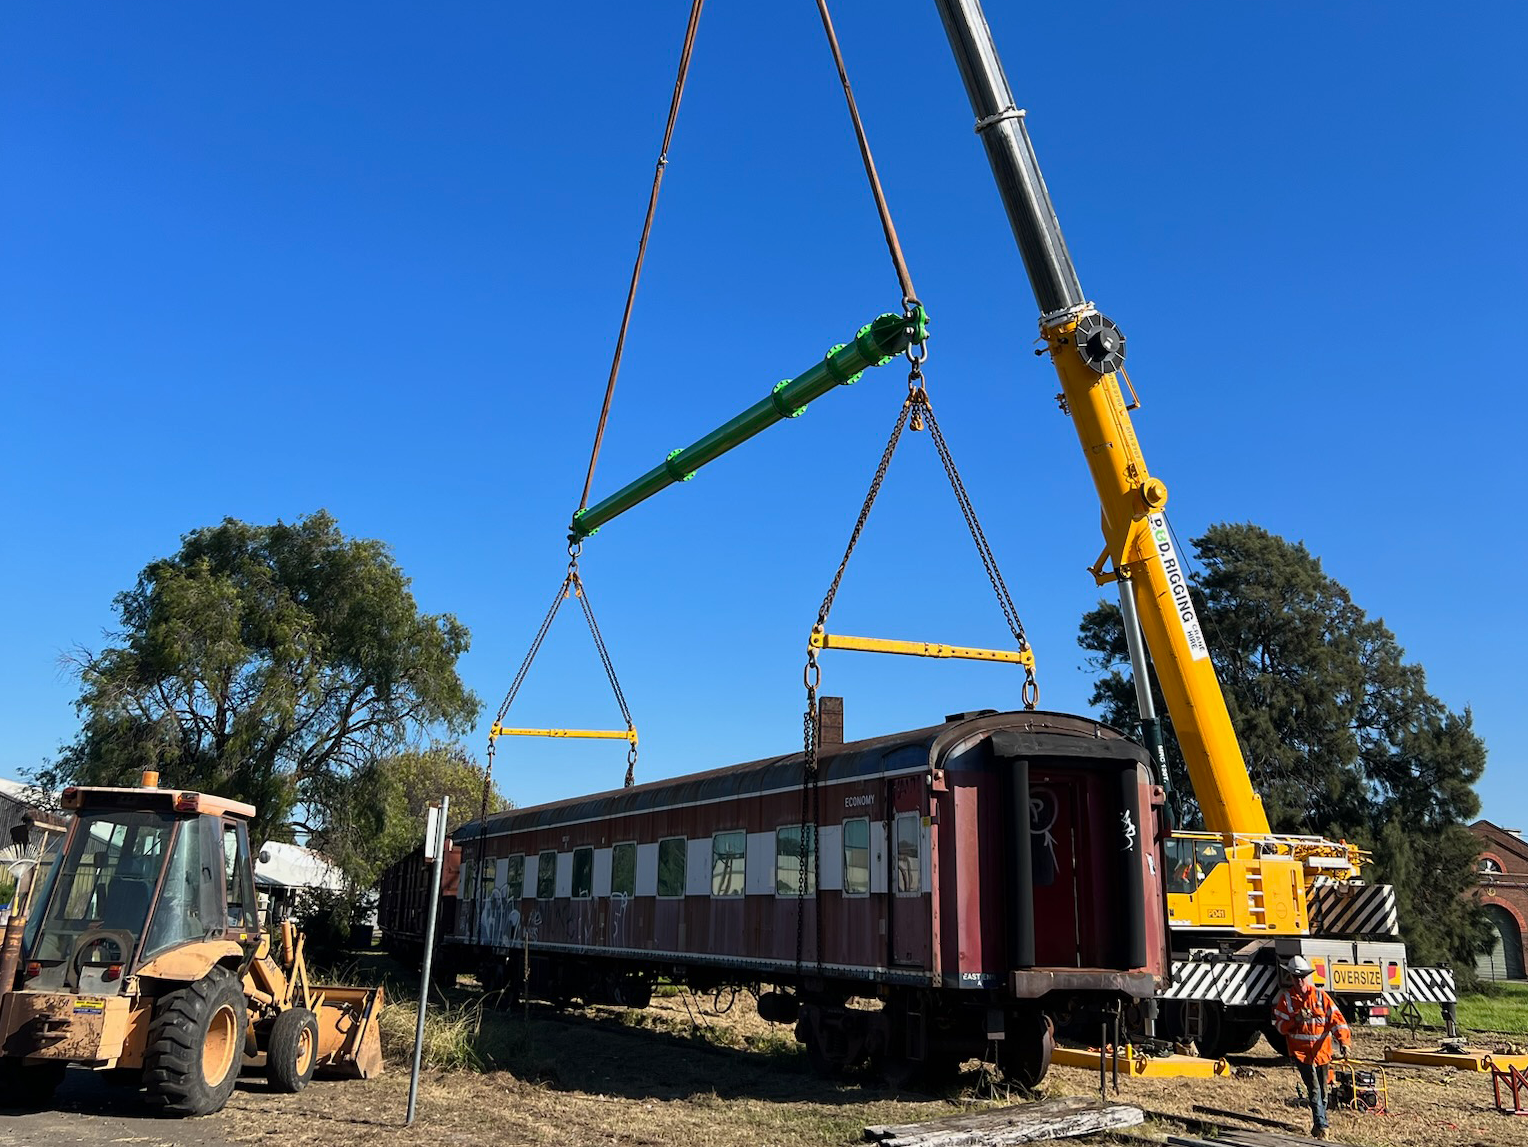 Modular spreader beam Lifts Train Carriages